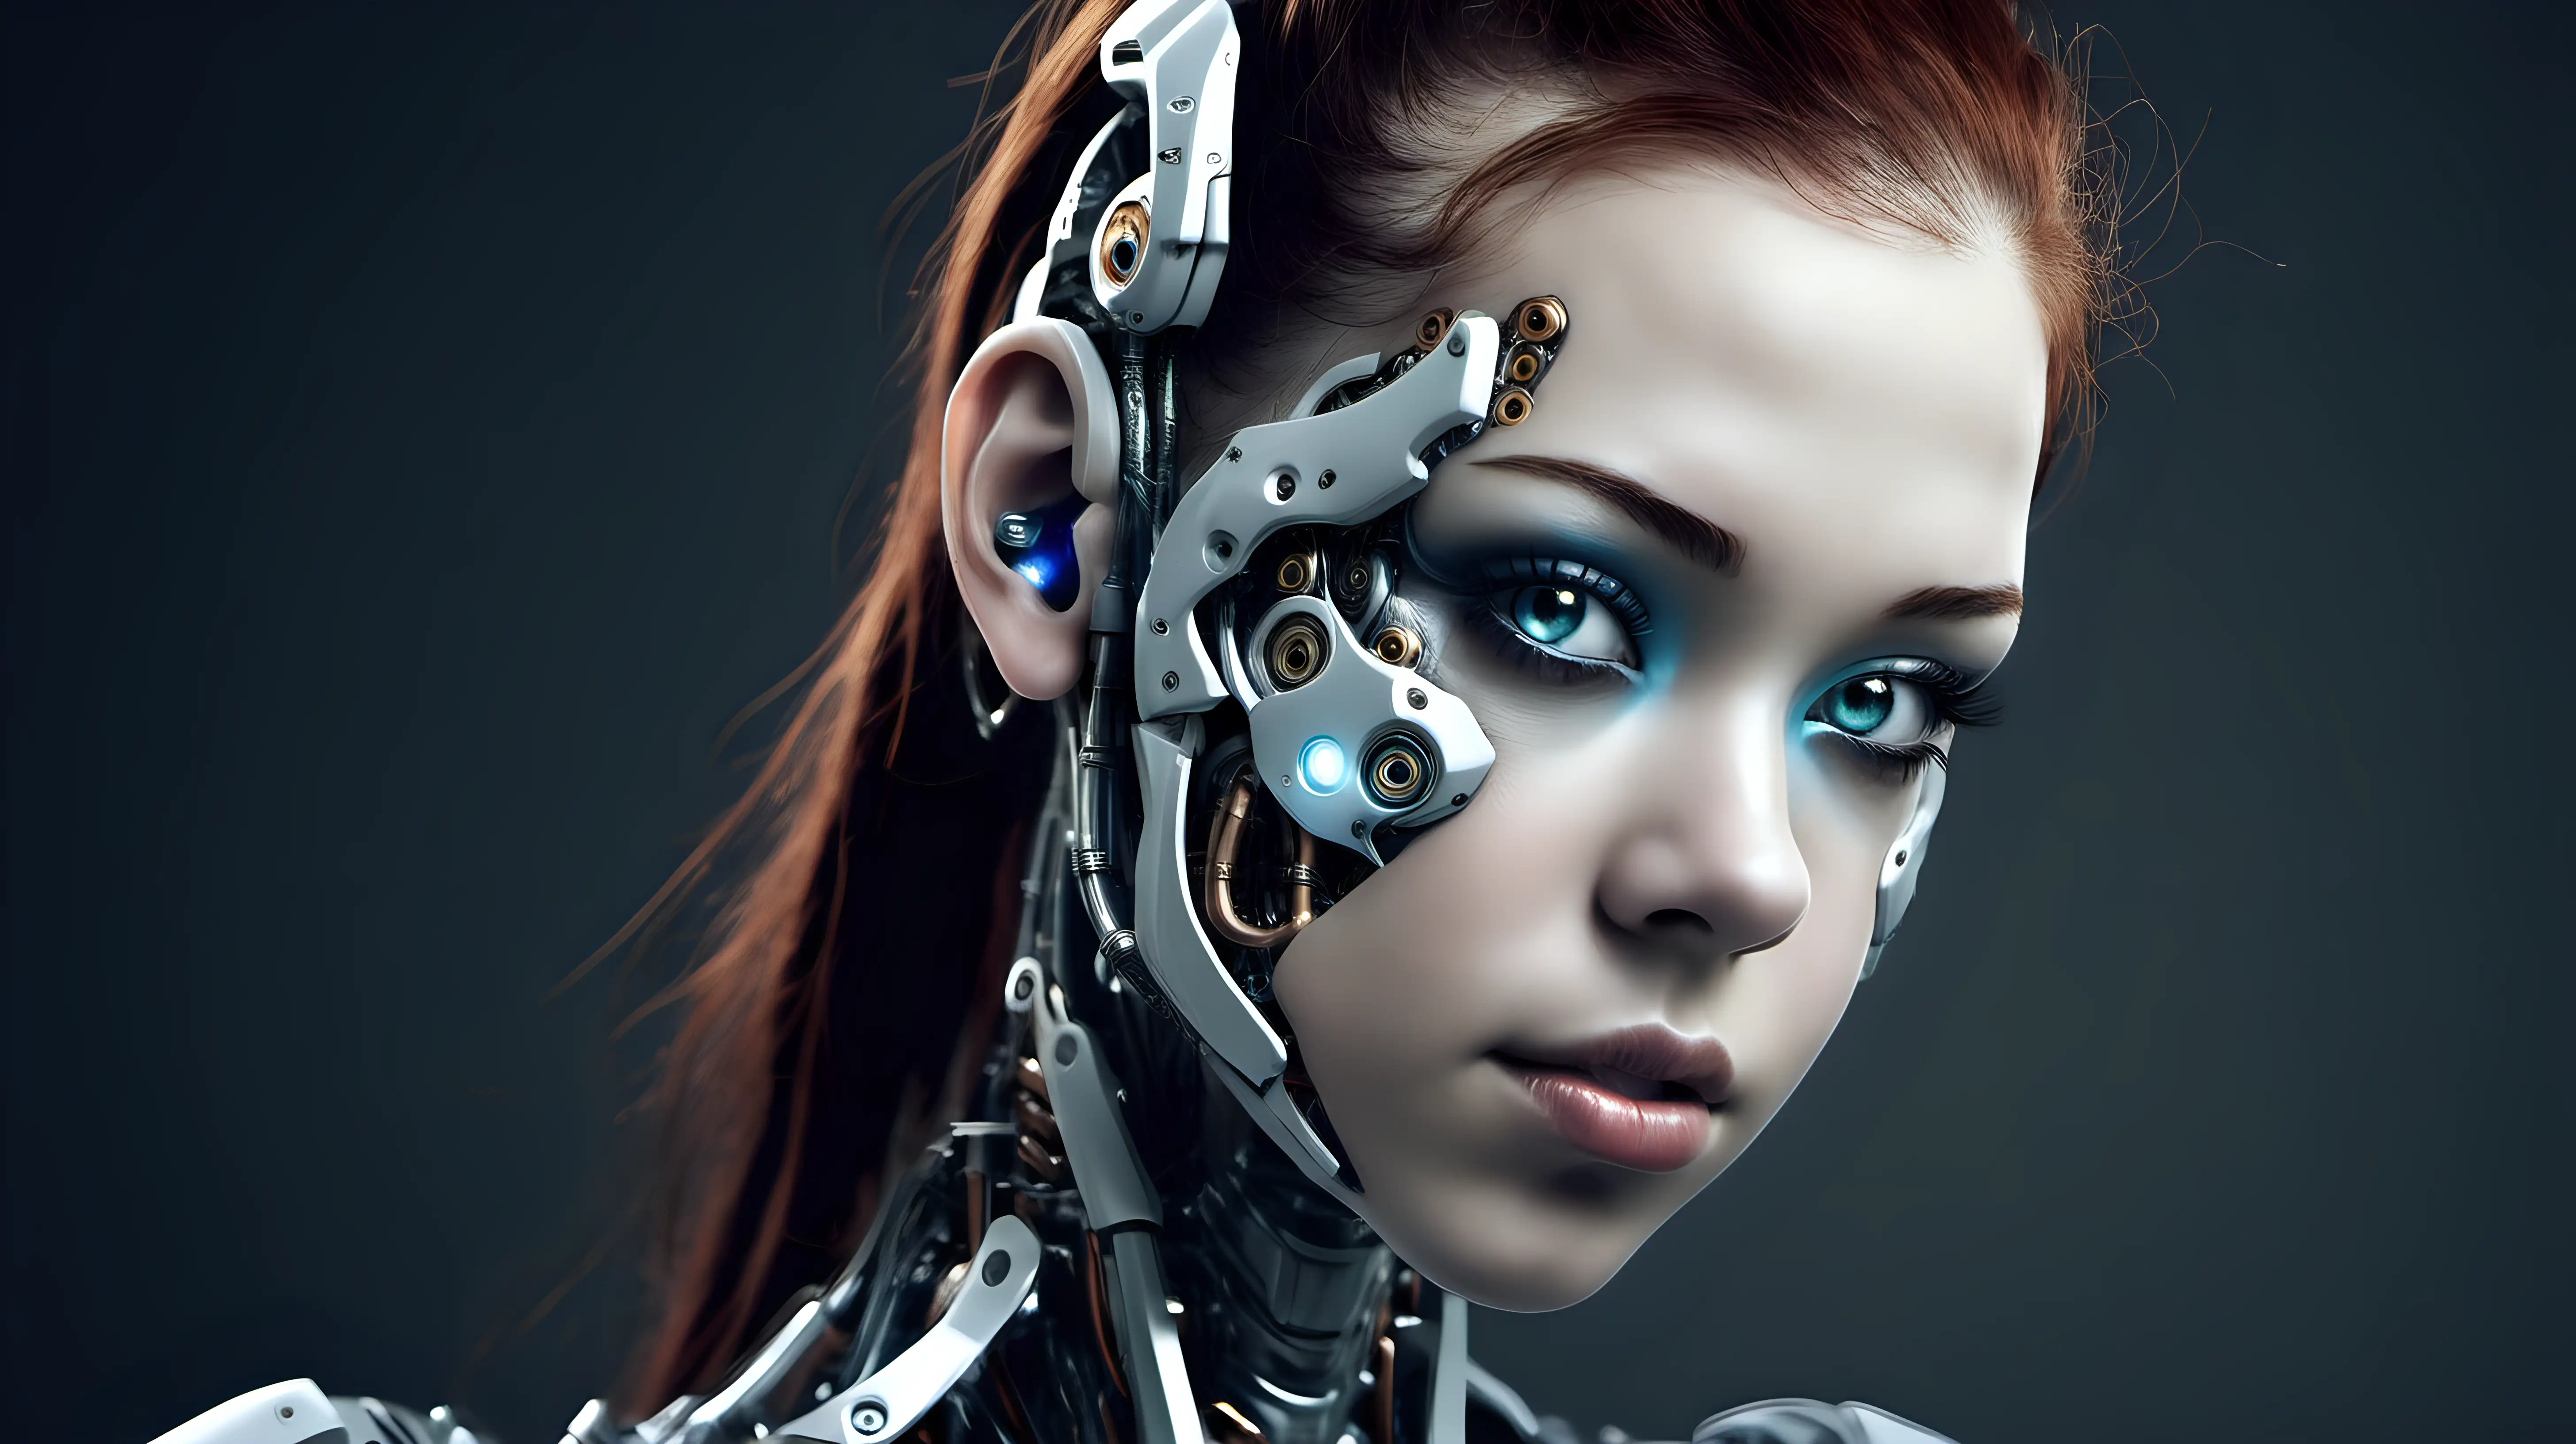 Beautiful Cyborg Woman with Stunning Cyborg Features